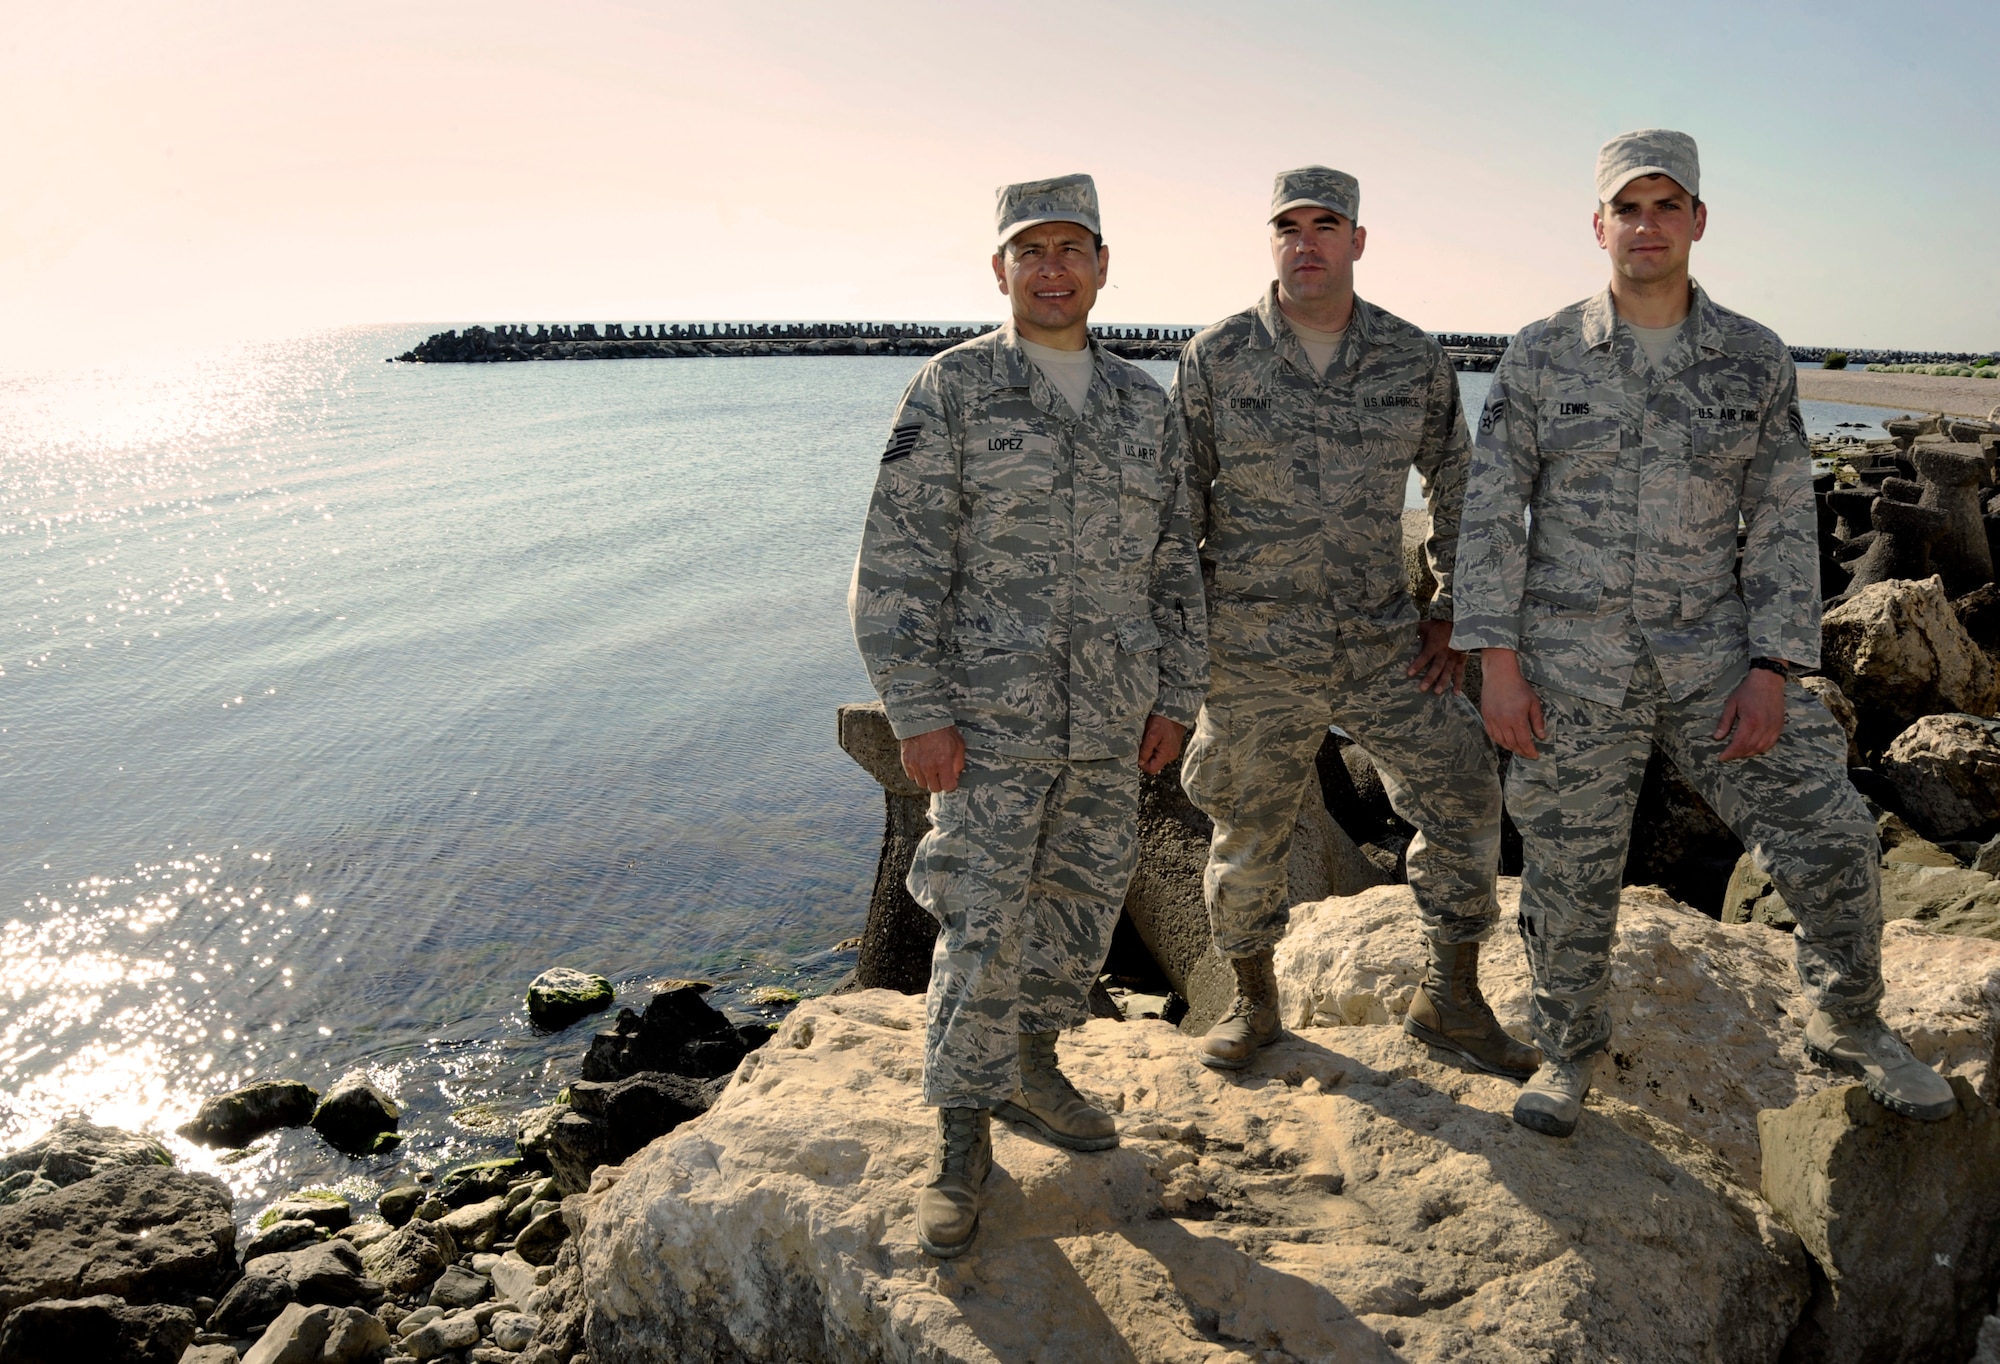 Oregon Air National Guardsmen from the 142nd Fighter Wing Civil Engineer Squadron, Tech. Sgt. Ramon Lopez, left, Senior Airman Tyler O’Bryant, center, and Senior Airman Zachariah Lewis, right, pause for a group photograph along the Black Sea in the City of Mangalia, Romania, May 13, 2015, as part of the U.S. European Command’s (EUCOM) Humanitarian Civic Assistance Program (HCA). The three Airmen on deployment in Romania also recently finished a deployment in Quang Ngai Province, Vietnam, during Operation Pacific Angel, a joint and combined humanitarian assistance operation led by the U.S. Pacific Air Forces. (U.S. Air National Guard photo by Tech. Sgt. John Hughel, 142nd Fighter Wing Public Affairs/Released)